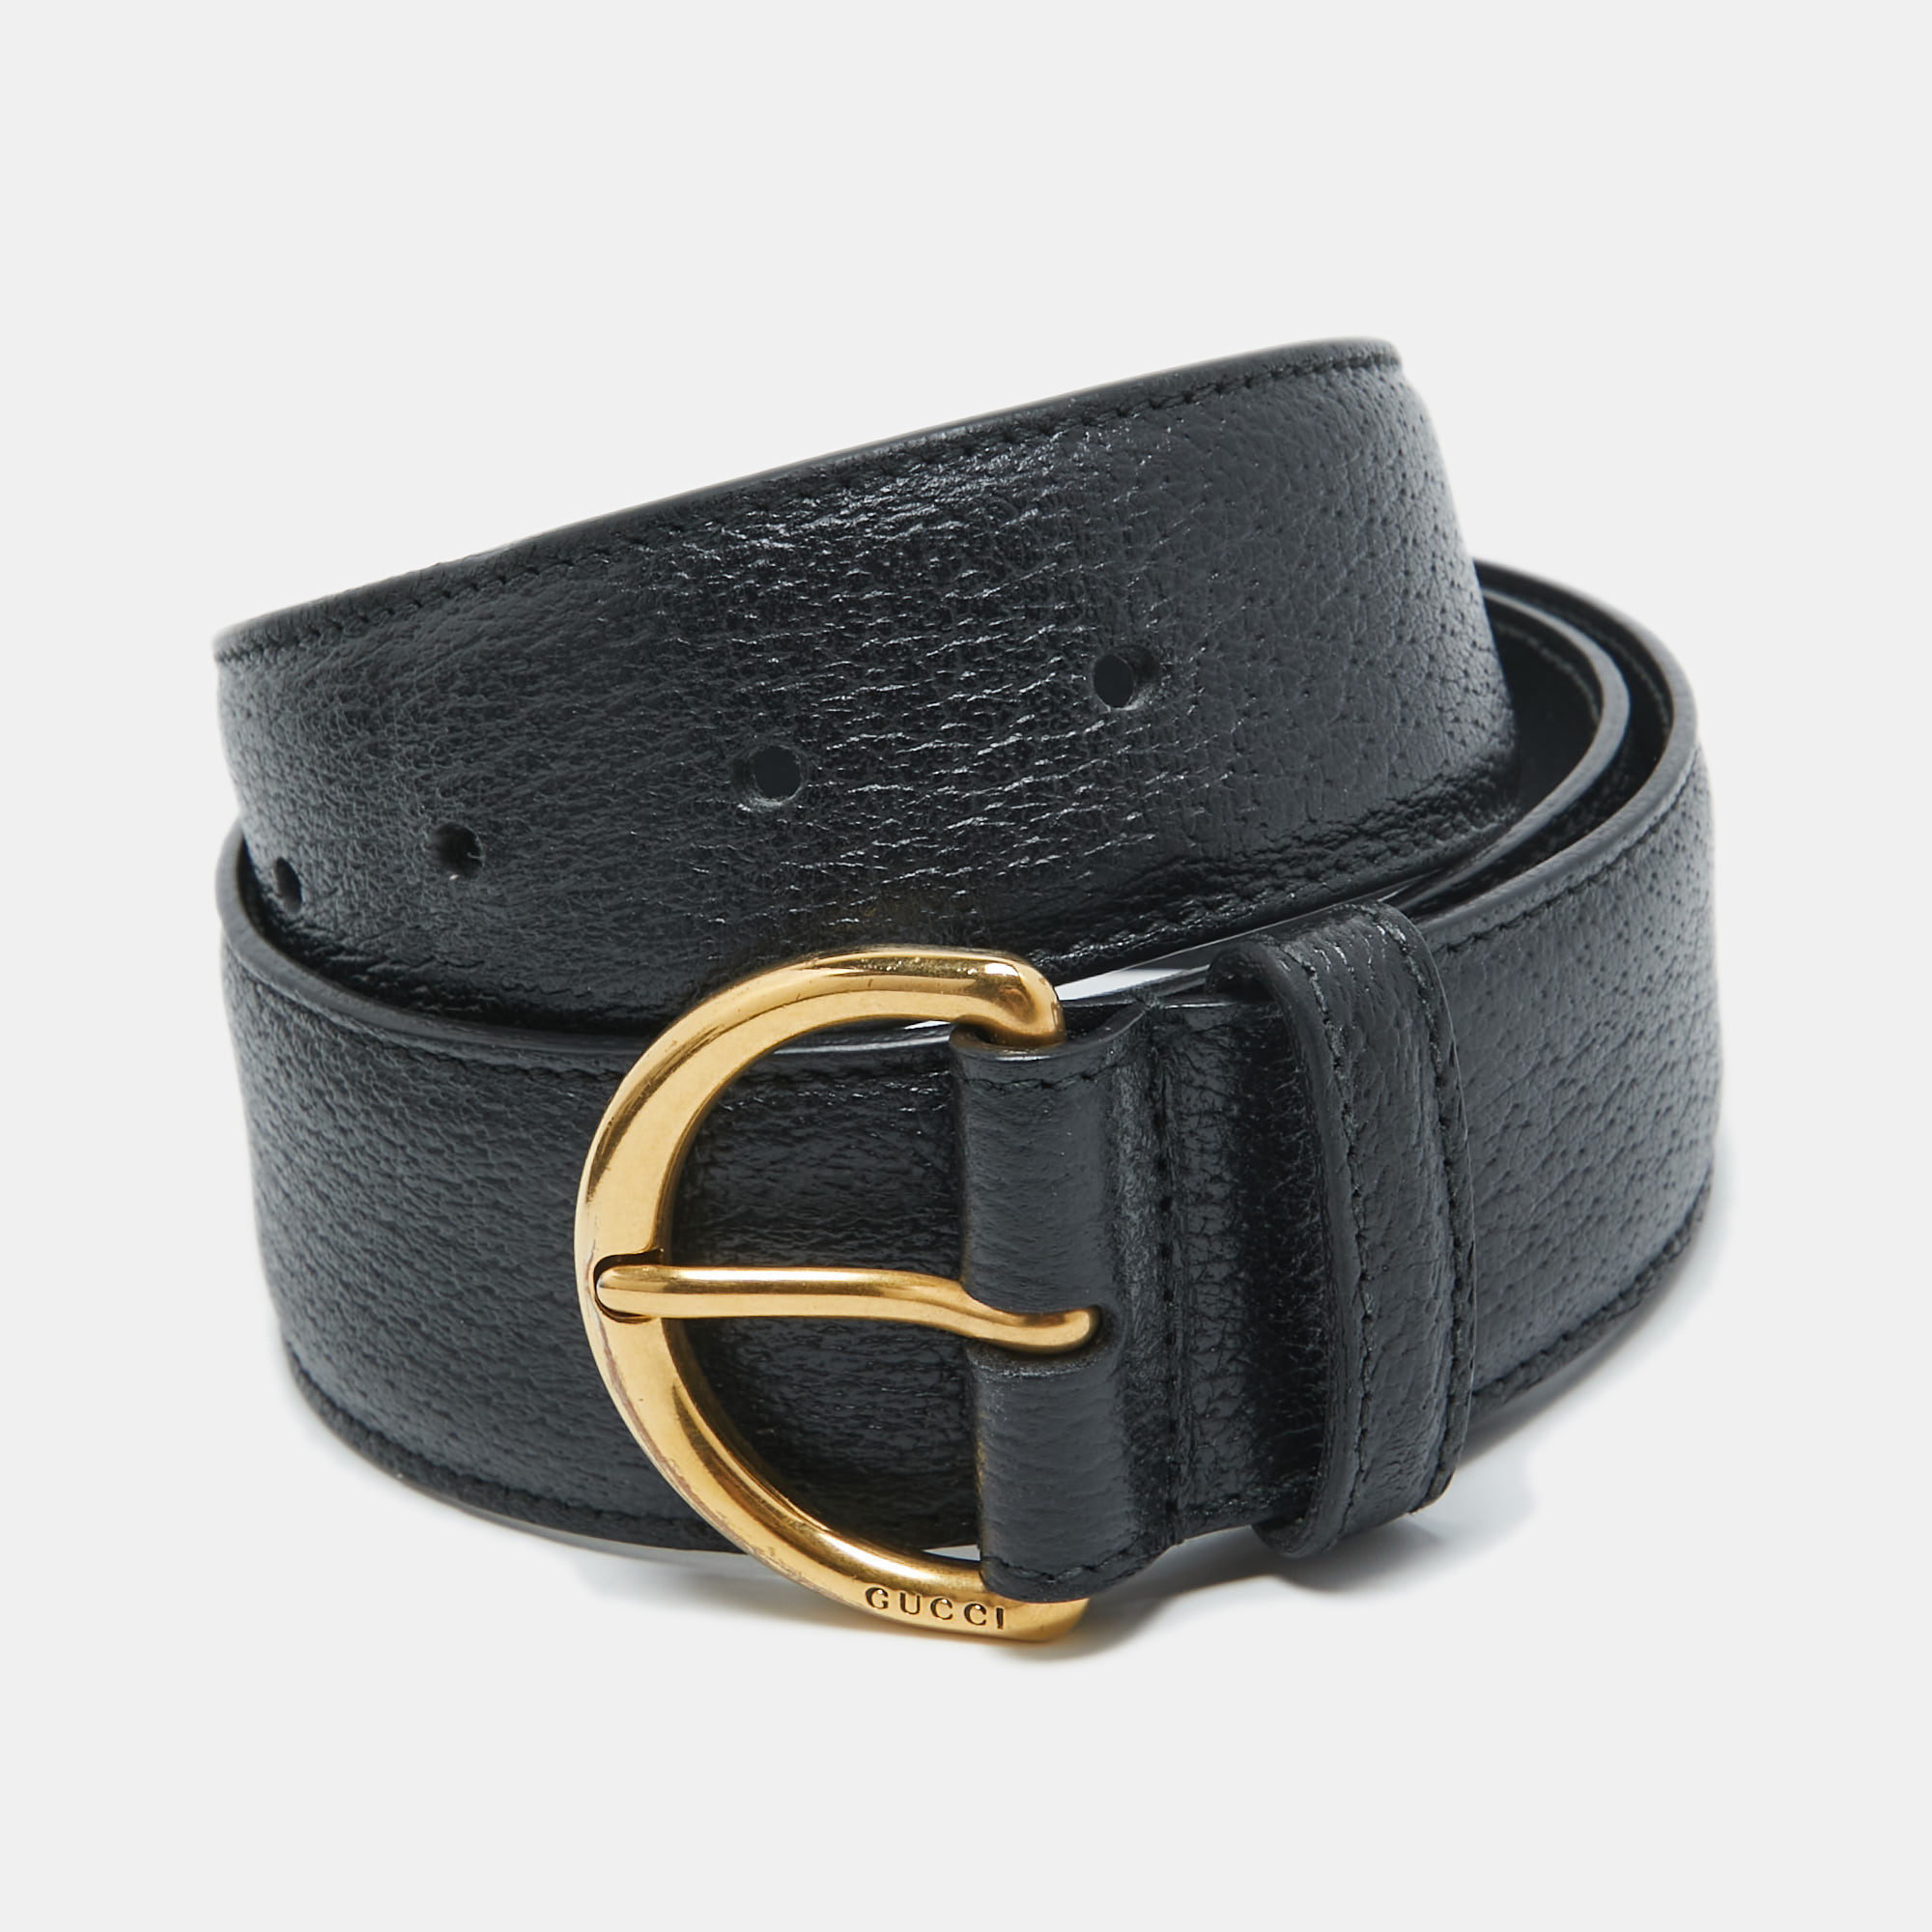 With a refined design this Gucci belt is a must have accessory. The brand detailed buckle adorns the front and it has a length of 70cm. Made from leather it is adorned with gold tone accents.